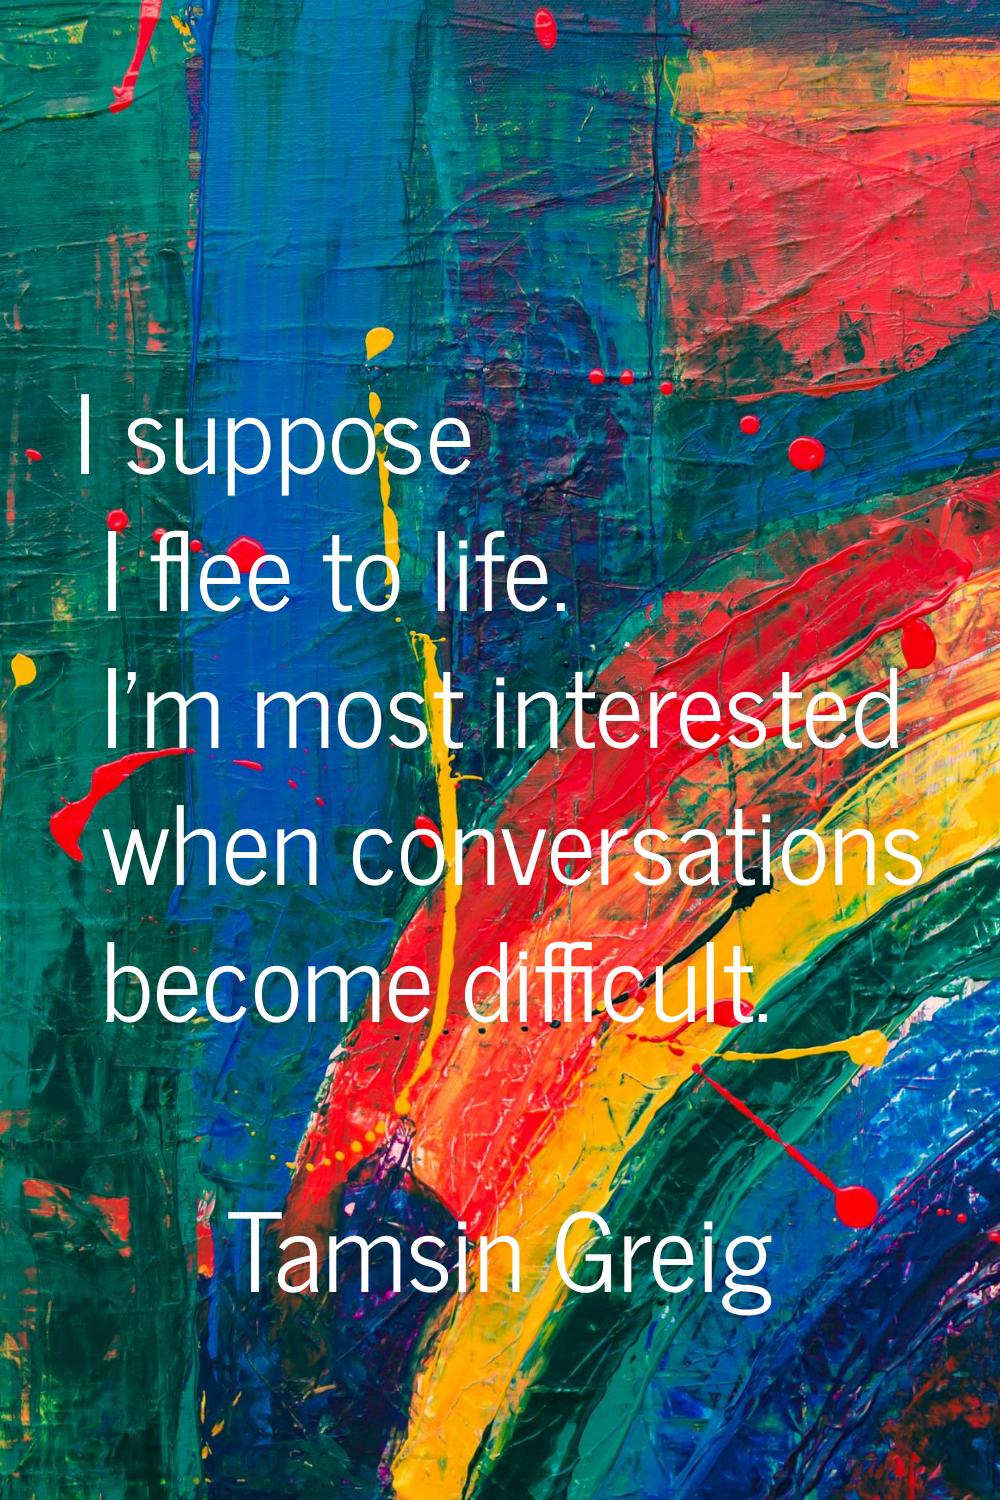 I suppose I flee to life. I'm most interested when conversations become difficult.